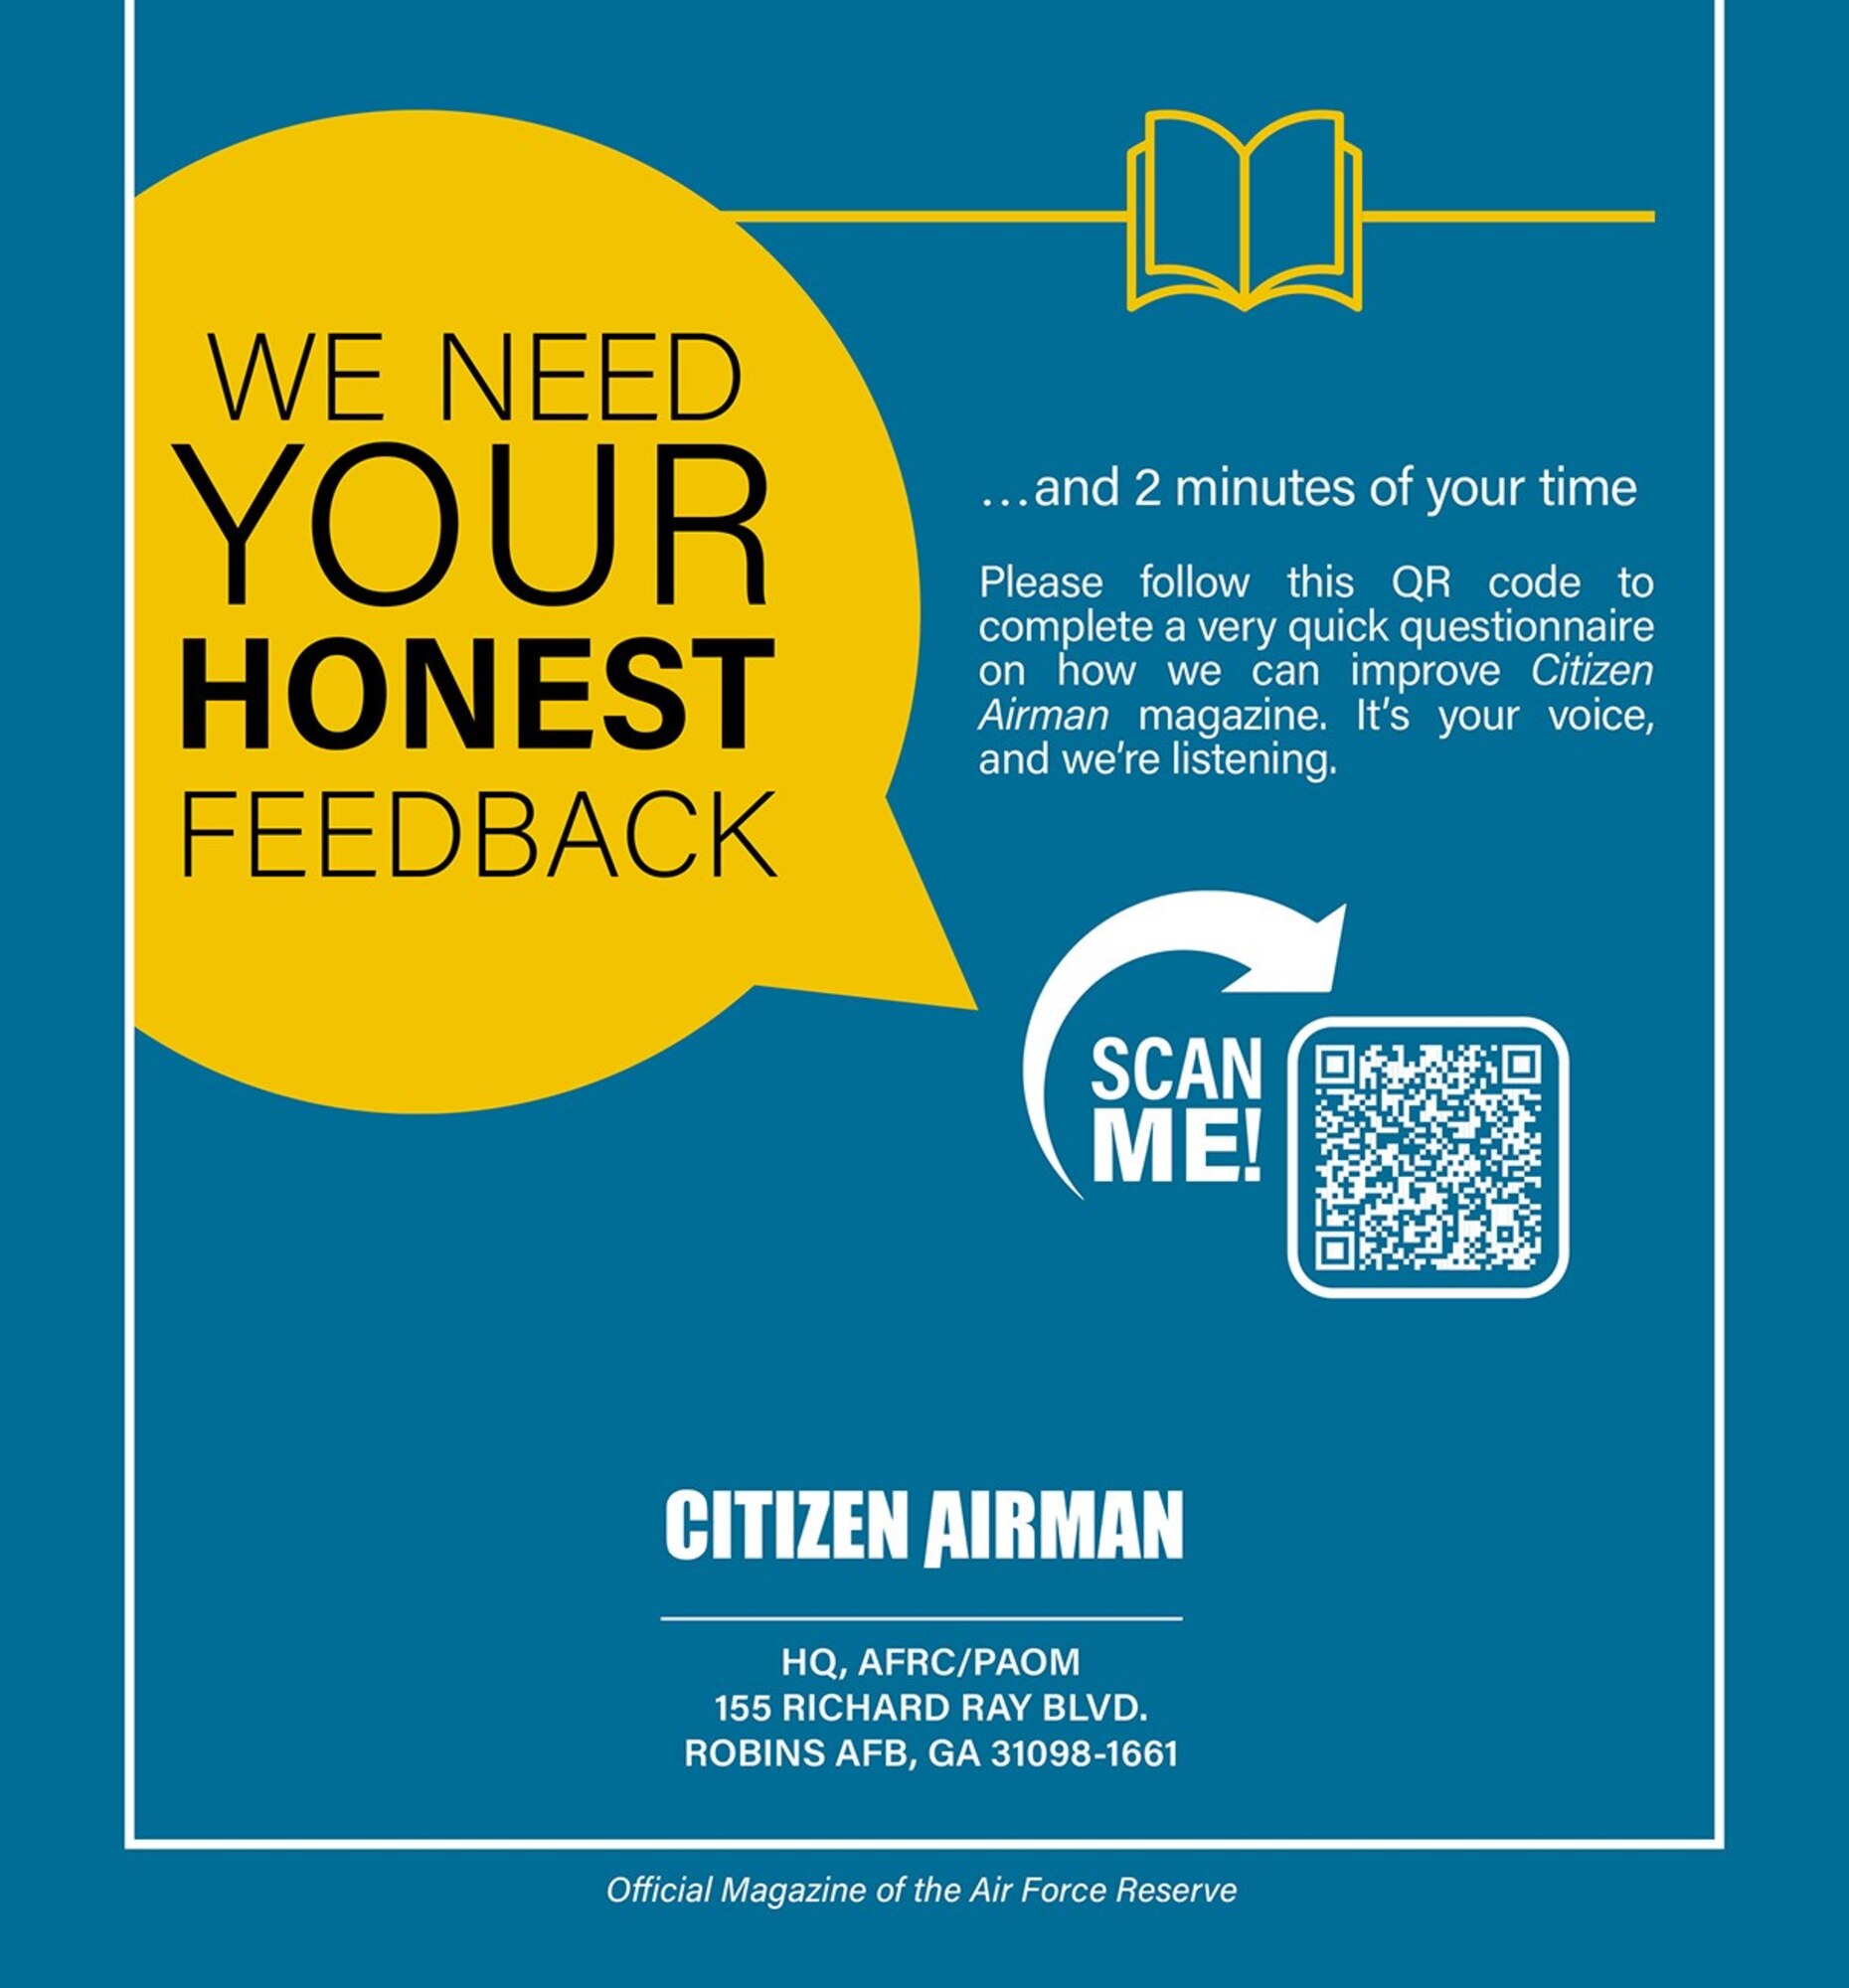 Please follow this QR code to complete a very quick questionnaire on how we can improve Citizen Airman magazine. It's your voice, and we're listening.